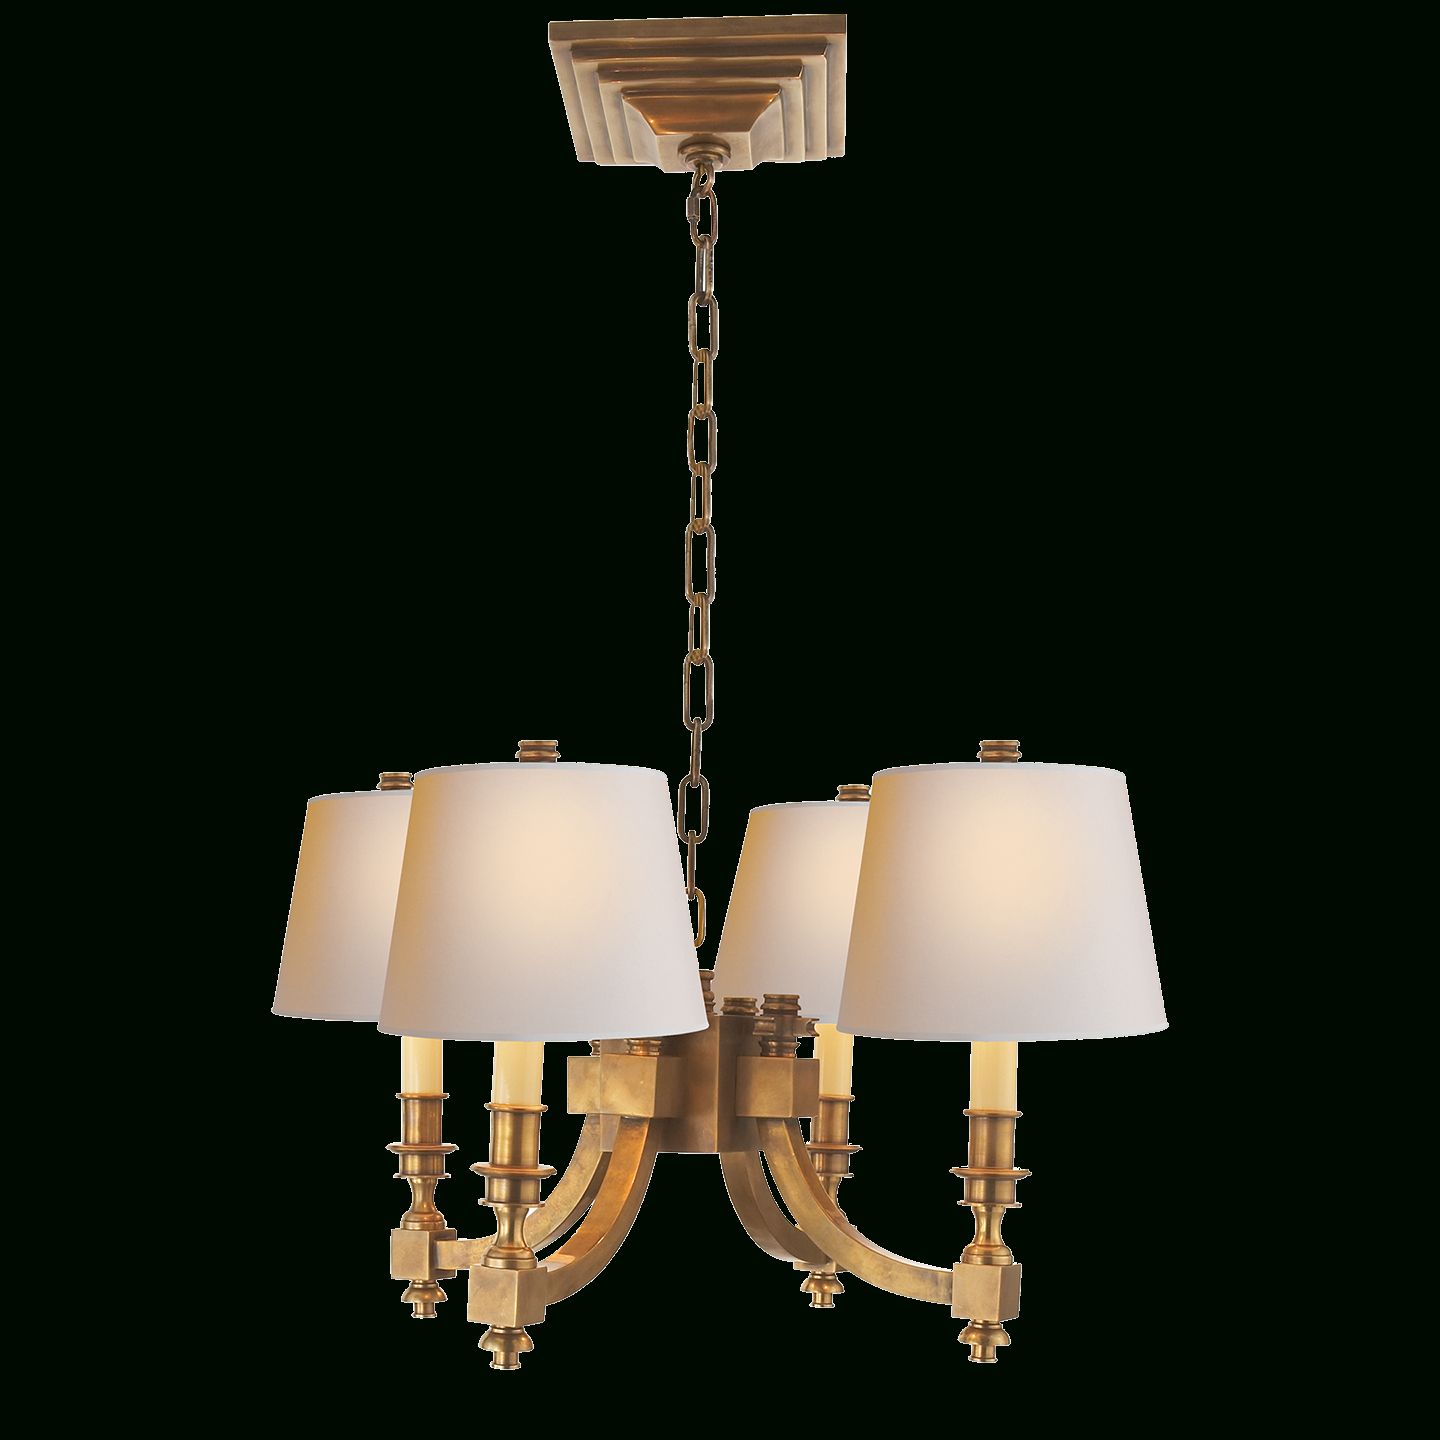 Hand Rubbed Antique Brass With Natural Paper Shades Intended For Recent Natural Brass Six Light Chandeliers (View 8 of 15)